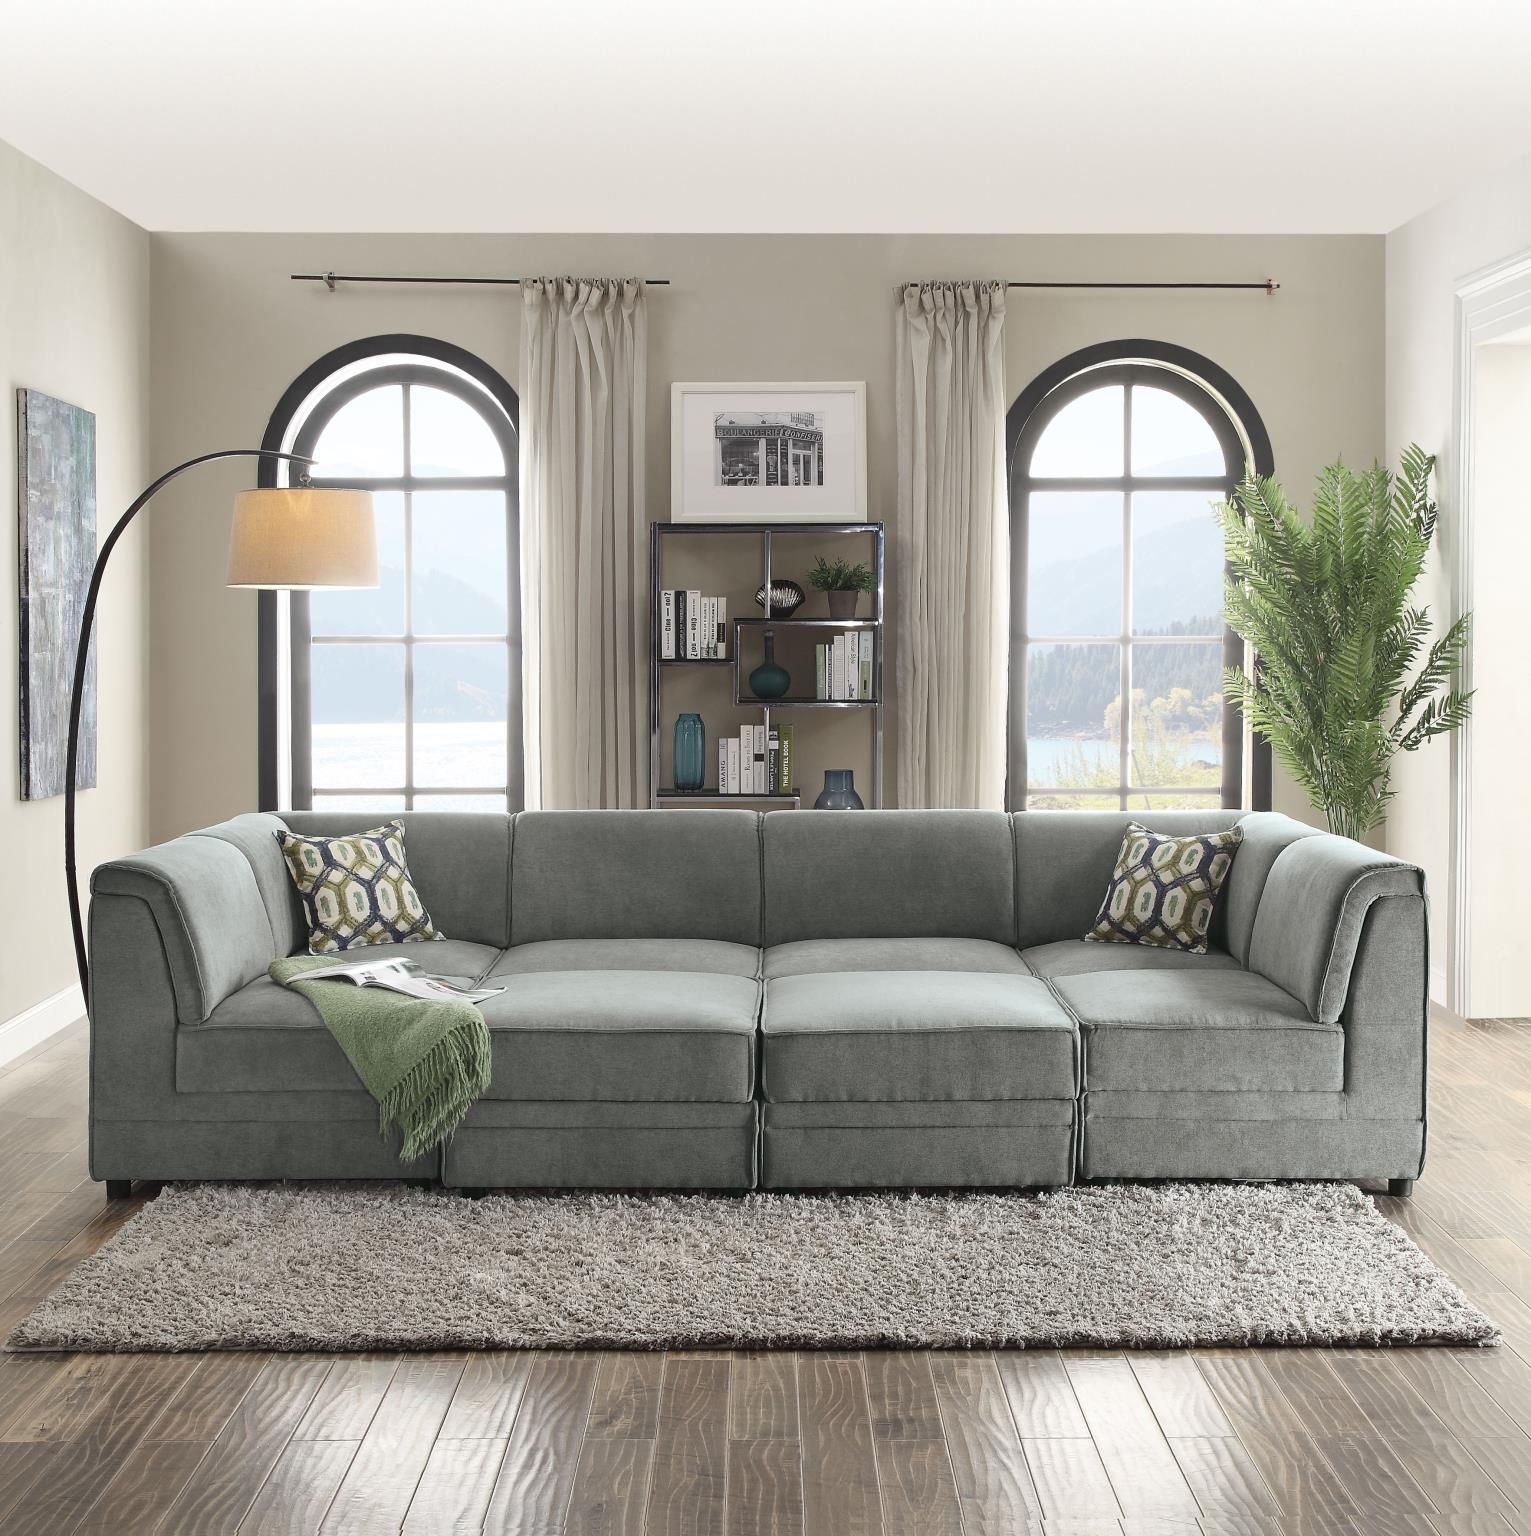 Bois I Modular Convertible Sectional Sofa Pertaining To Convertible Sofas (View 15 of 15)